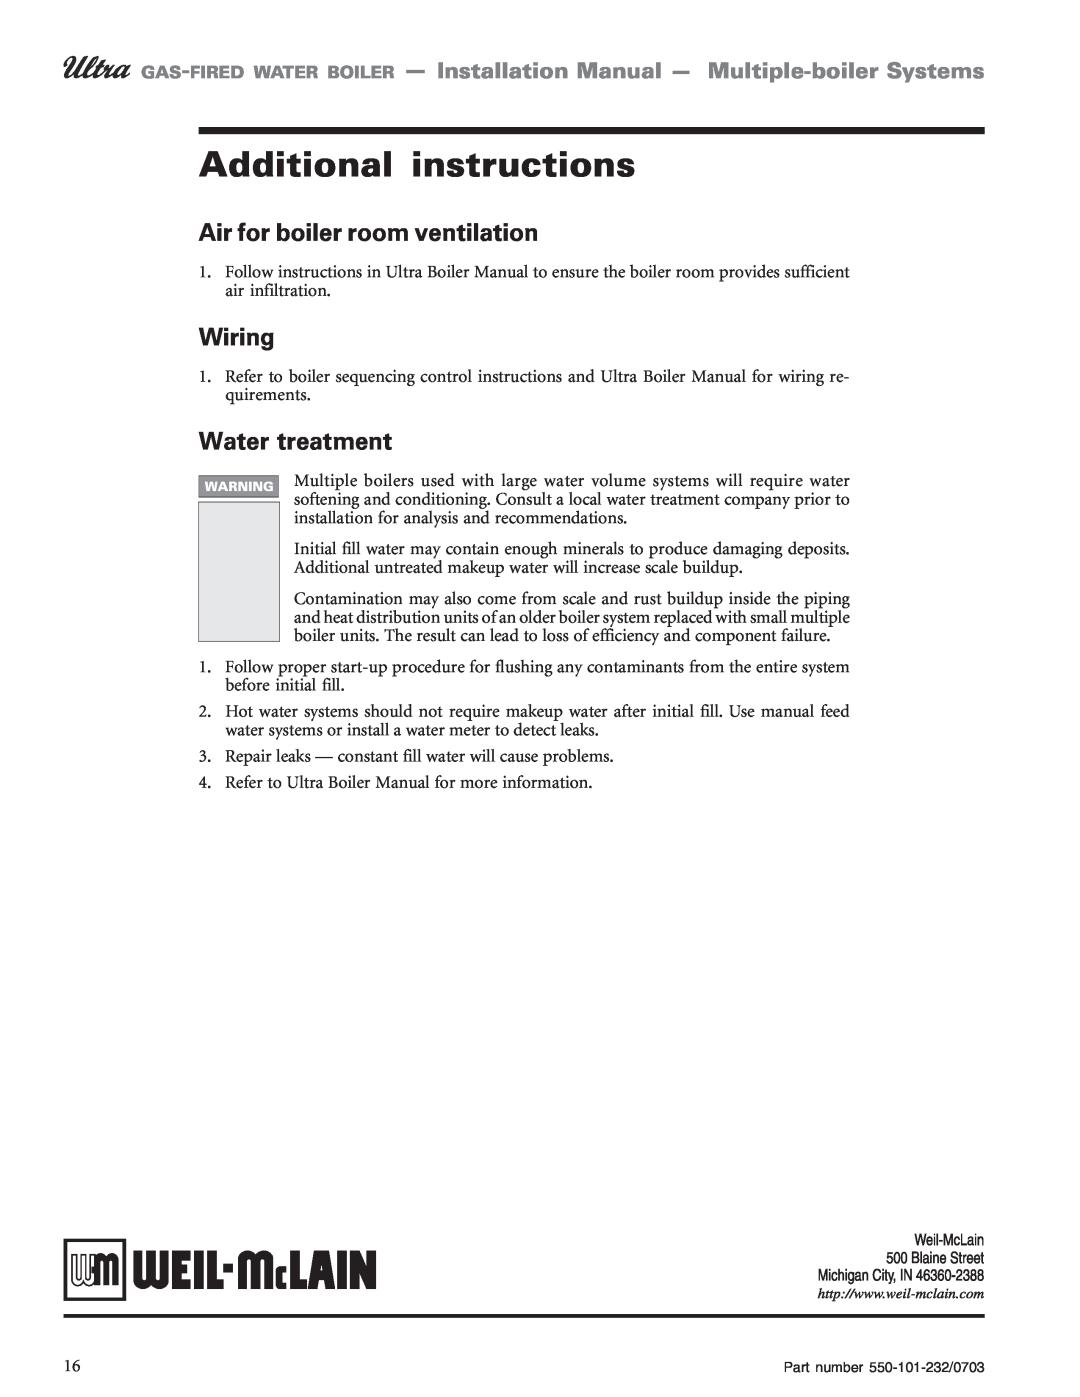 Weil-McLain Boiler installation manual Additional instructions, Air for boiler room ventilation, Wiring, Water treatment 